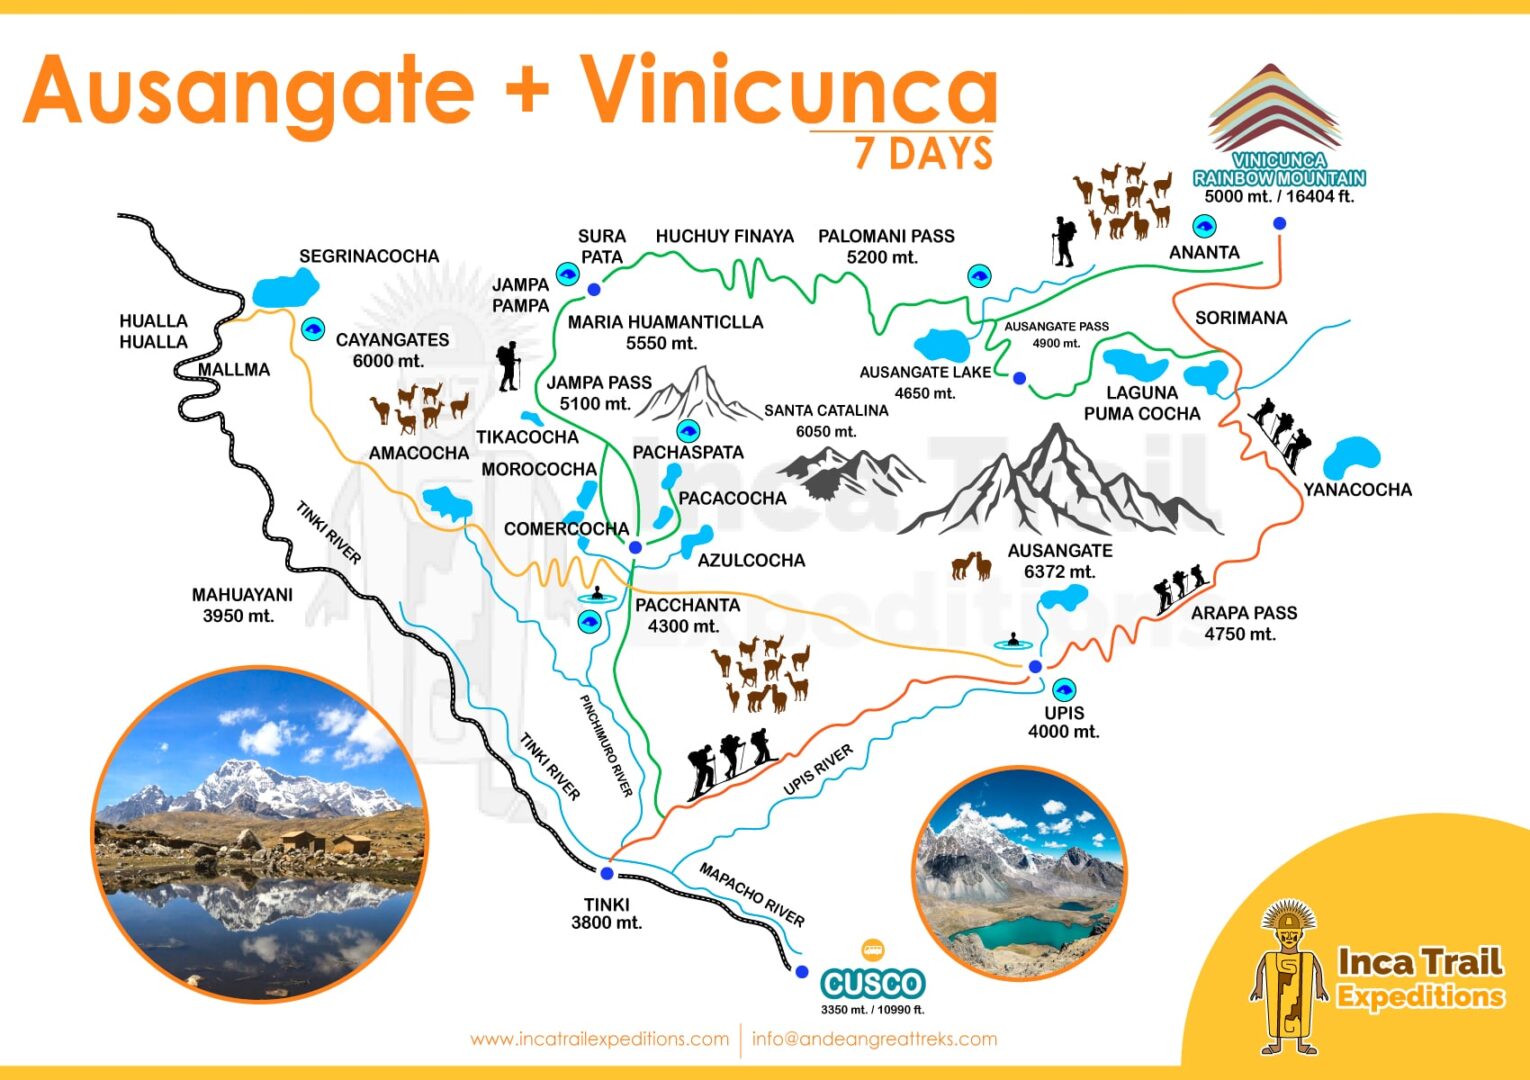 AUSANGATE-VINICUNCA-7-DAYS-BY-INCA-TRAIL-EXPEDITIONS